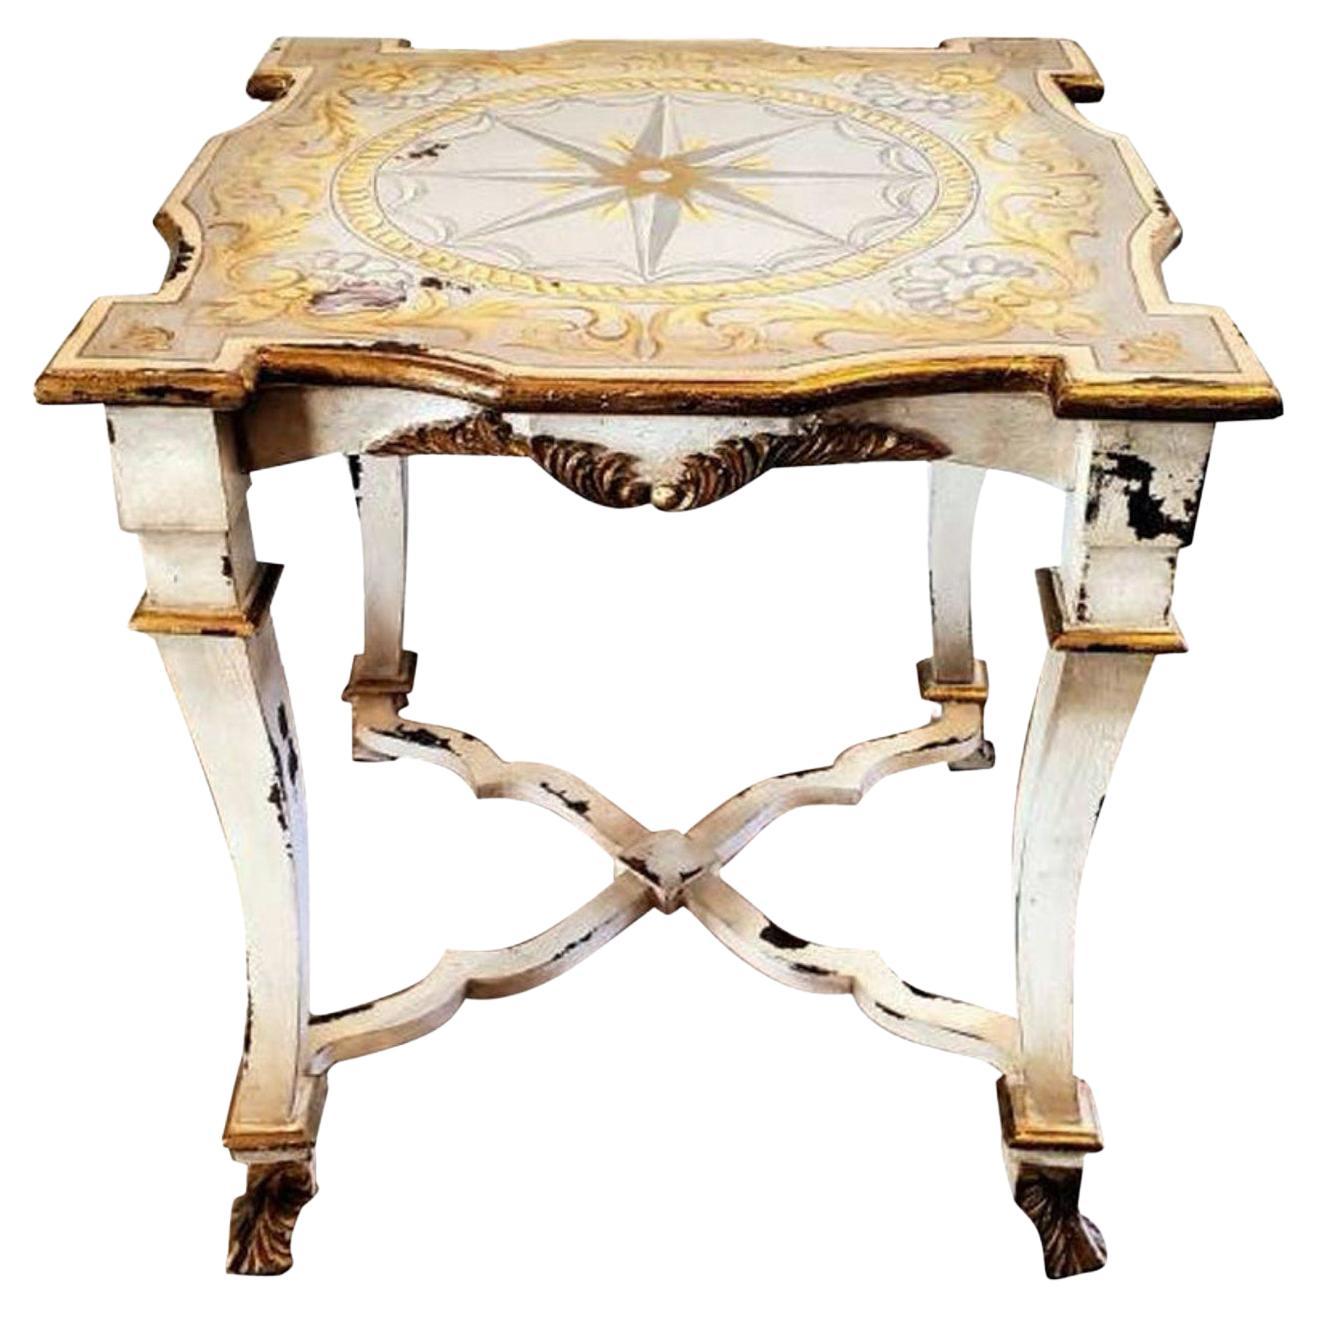 Guildmaster Neoclassical Style Carved Giltwood Compass Rose Table